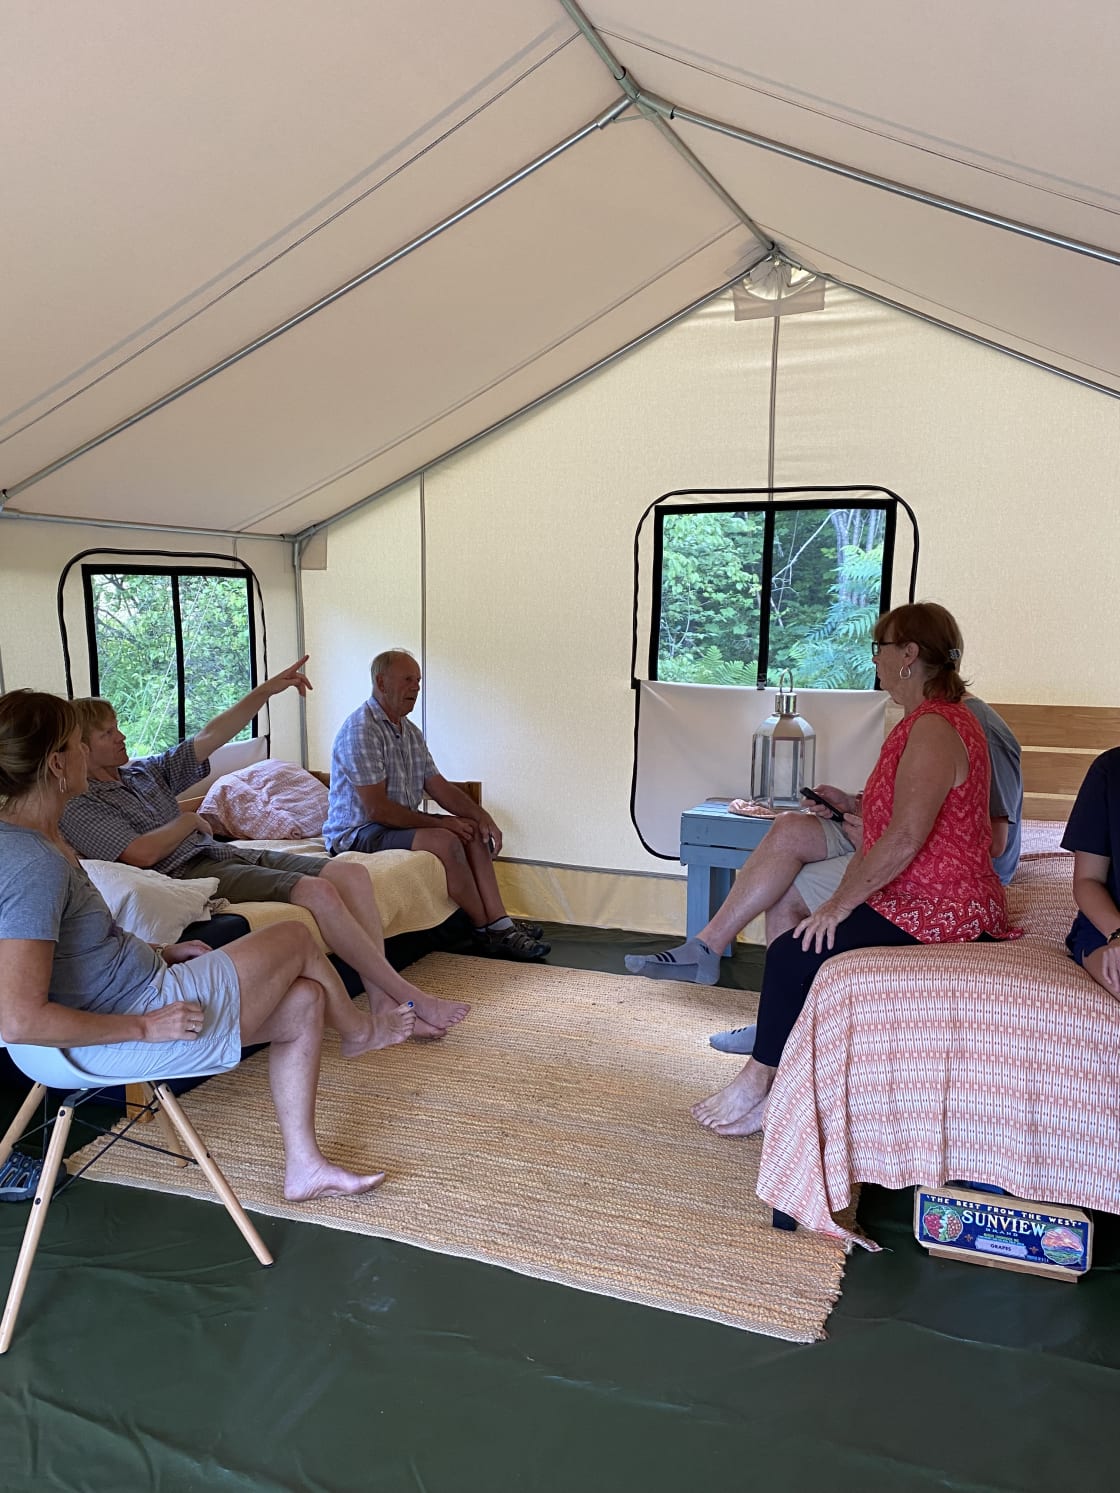 The tent is spacious, providing plenty of room for lounging.